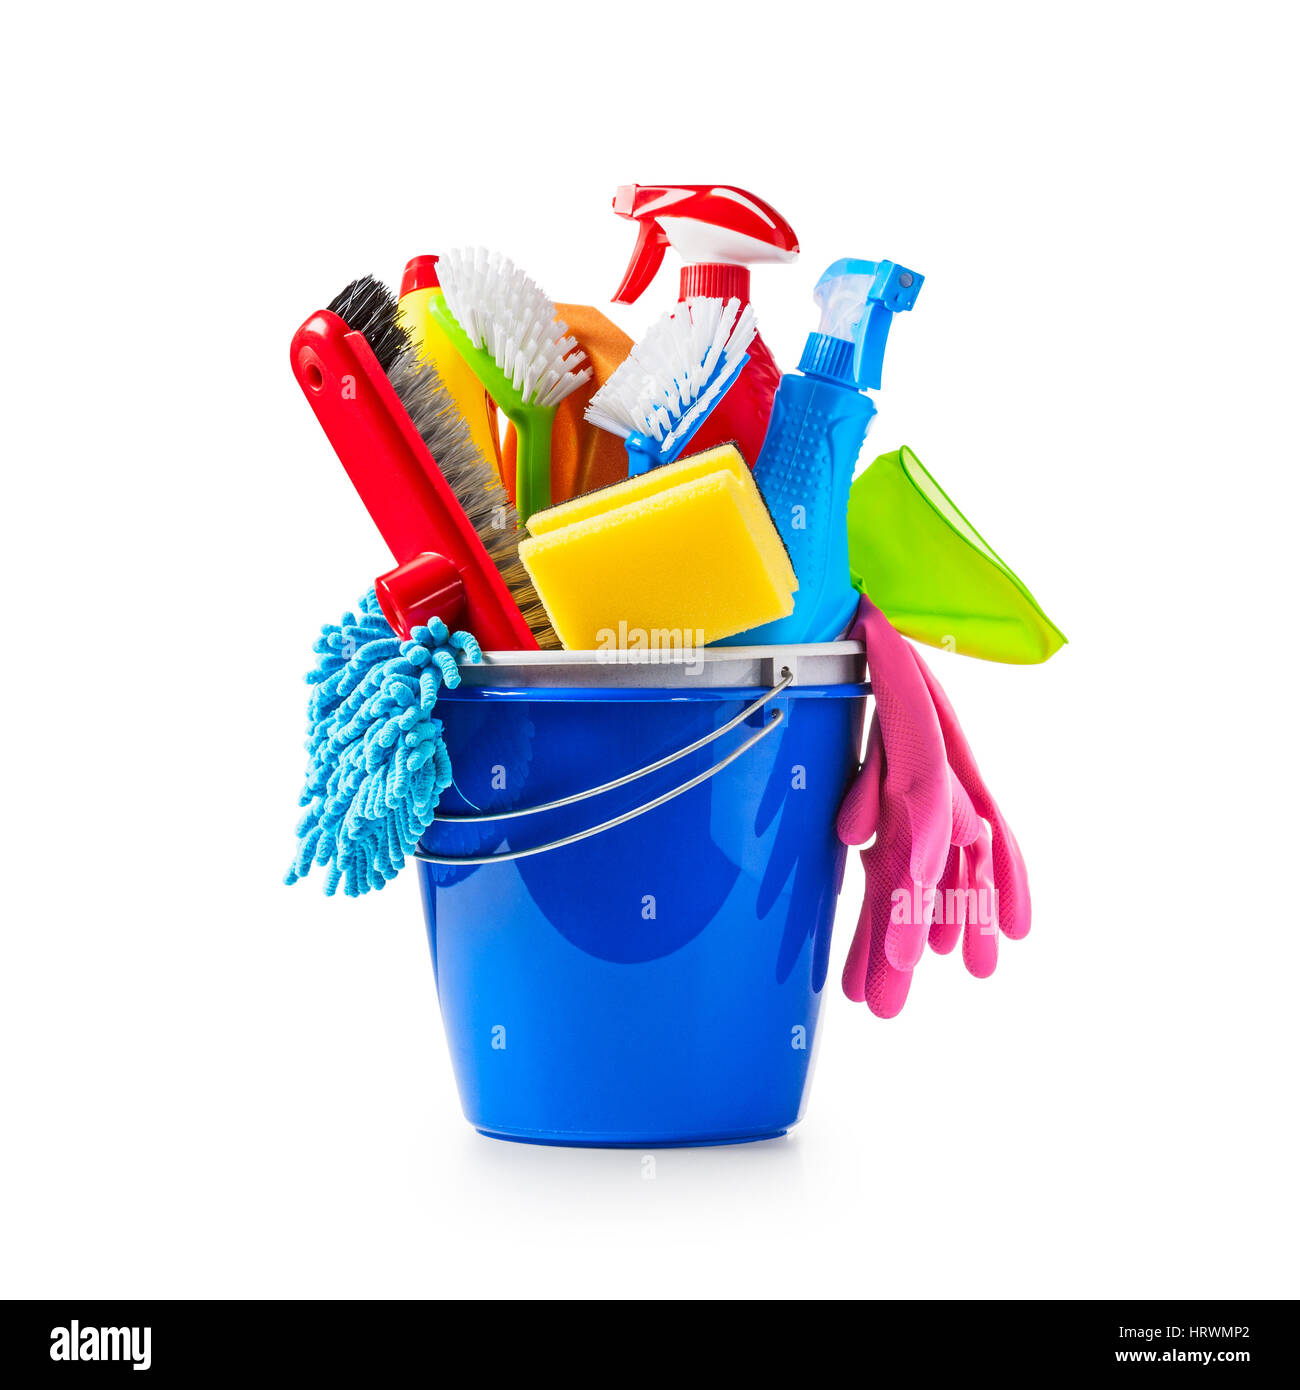 Blue bucket with cleaning supplies isolated on white background. Single object with clipping path Stock Photo